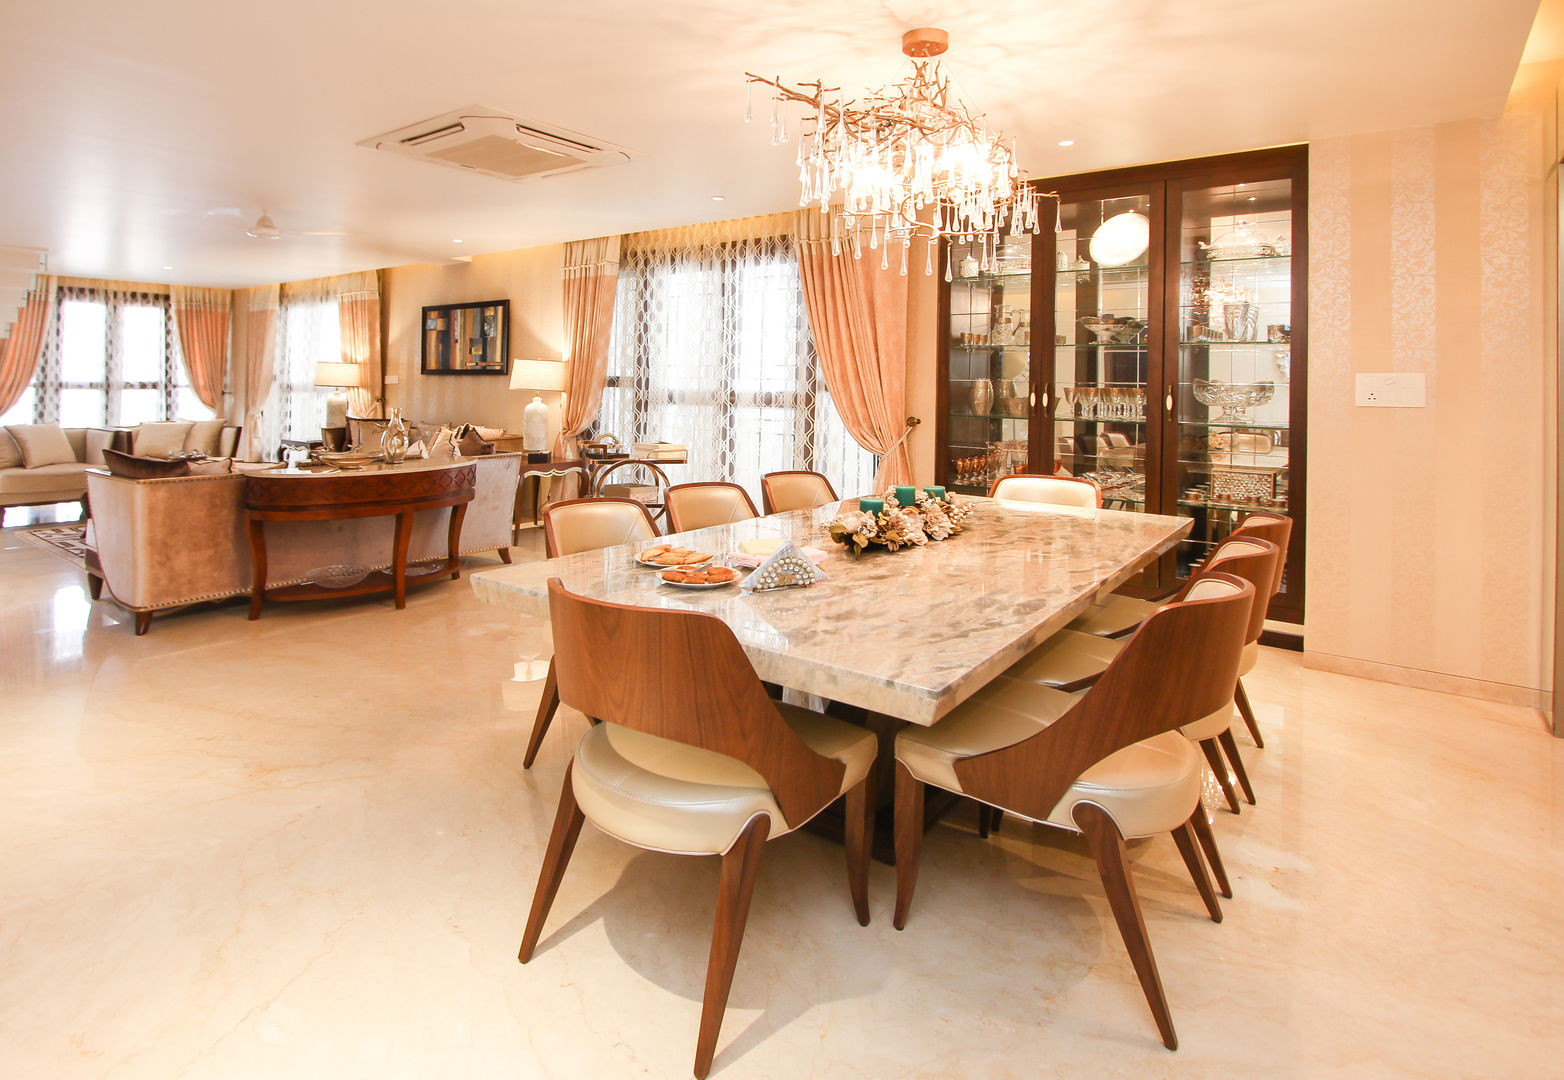 Dining Room Crosscurrents interiors private limited Modern dining room